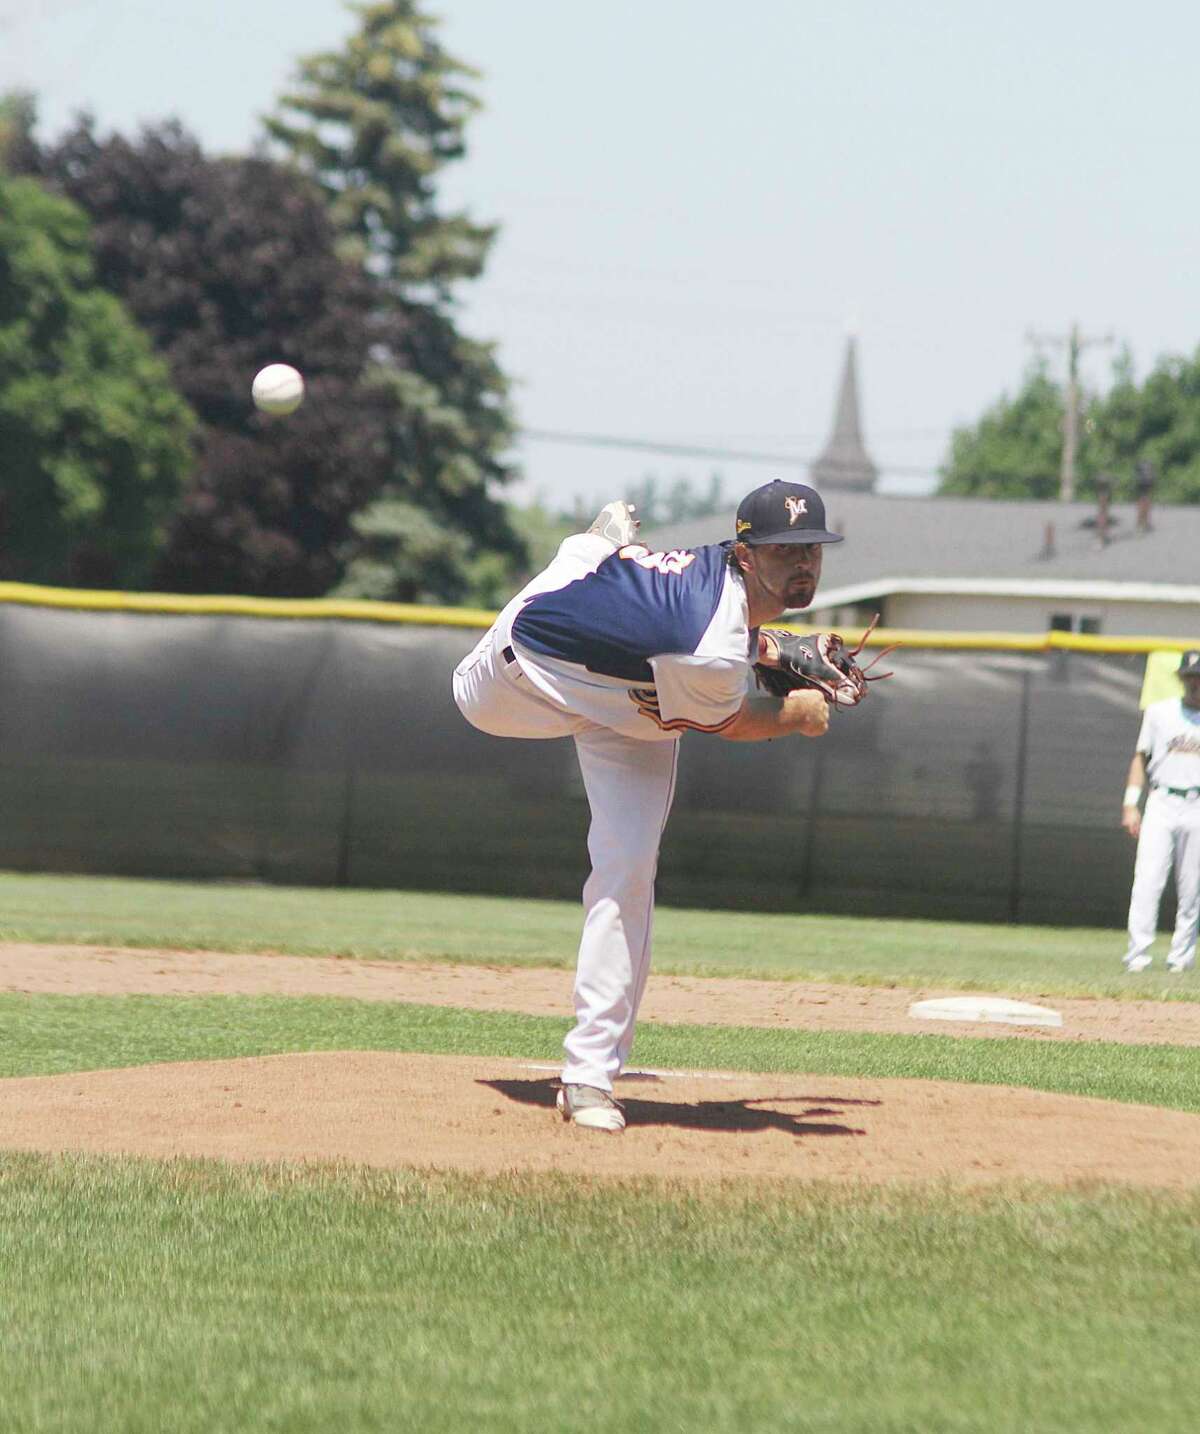 Roddy MacNeil, the Manistee Saints' Pitcher of the Year in 2020, was recently named manager of the team. (News Advocate file photo)